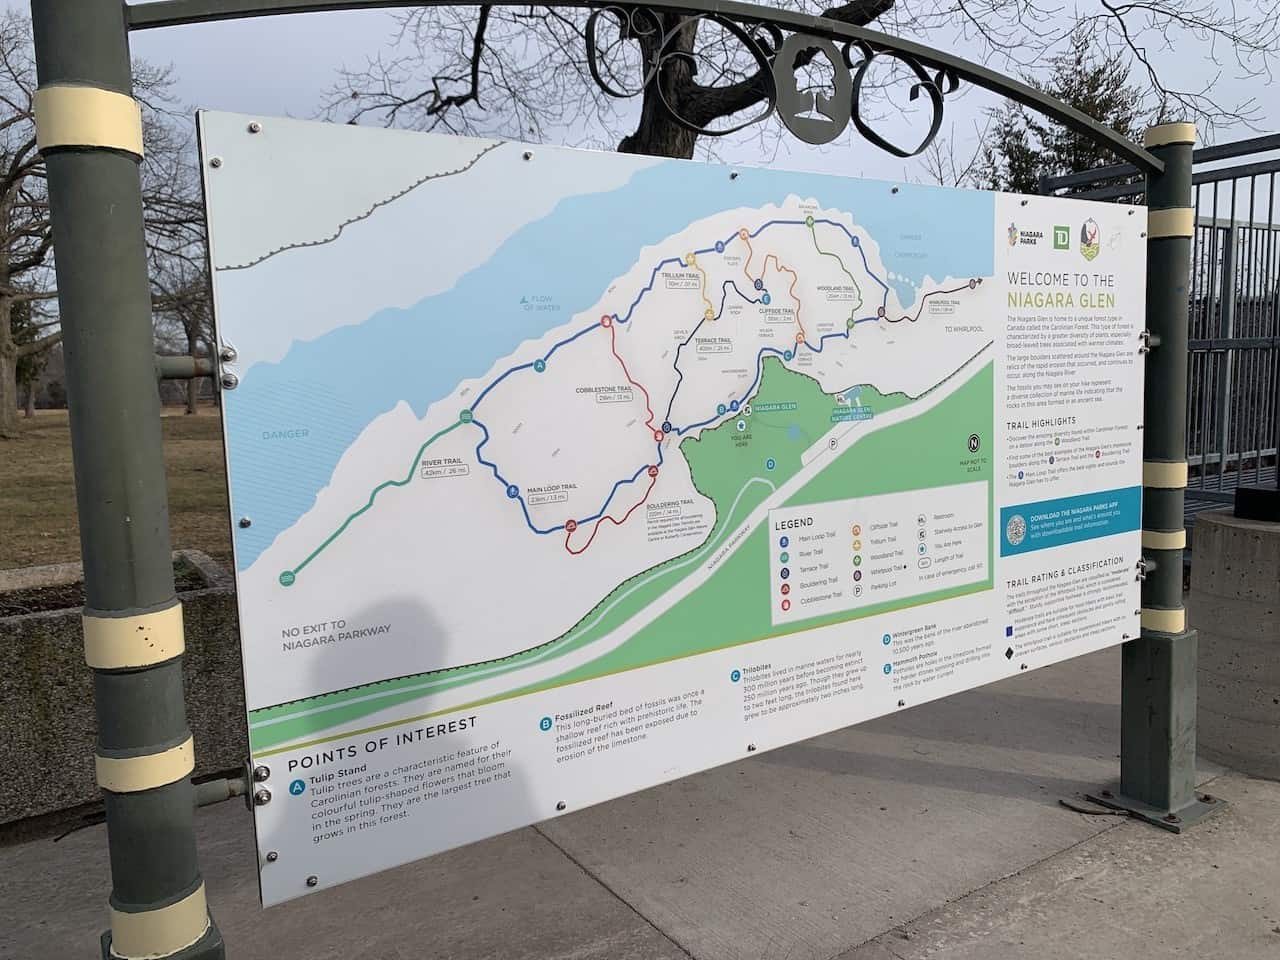 Niagara Glen Trail Map - Before heading onto the Niagara Glen Trail, there is a map for visitors to provide information about the hiking trails and the surrounding areas.